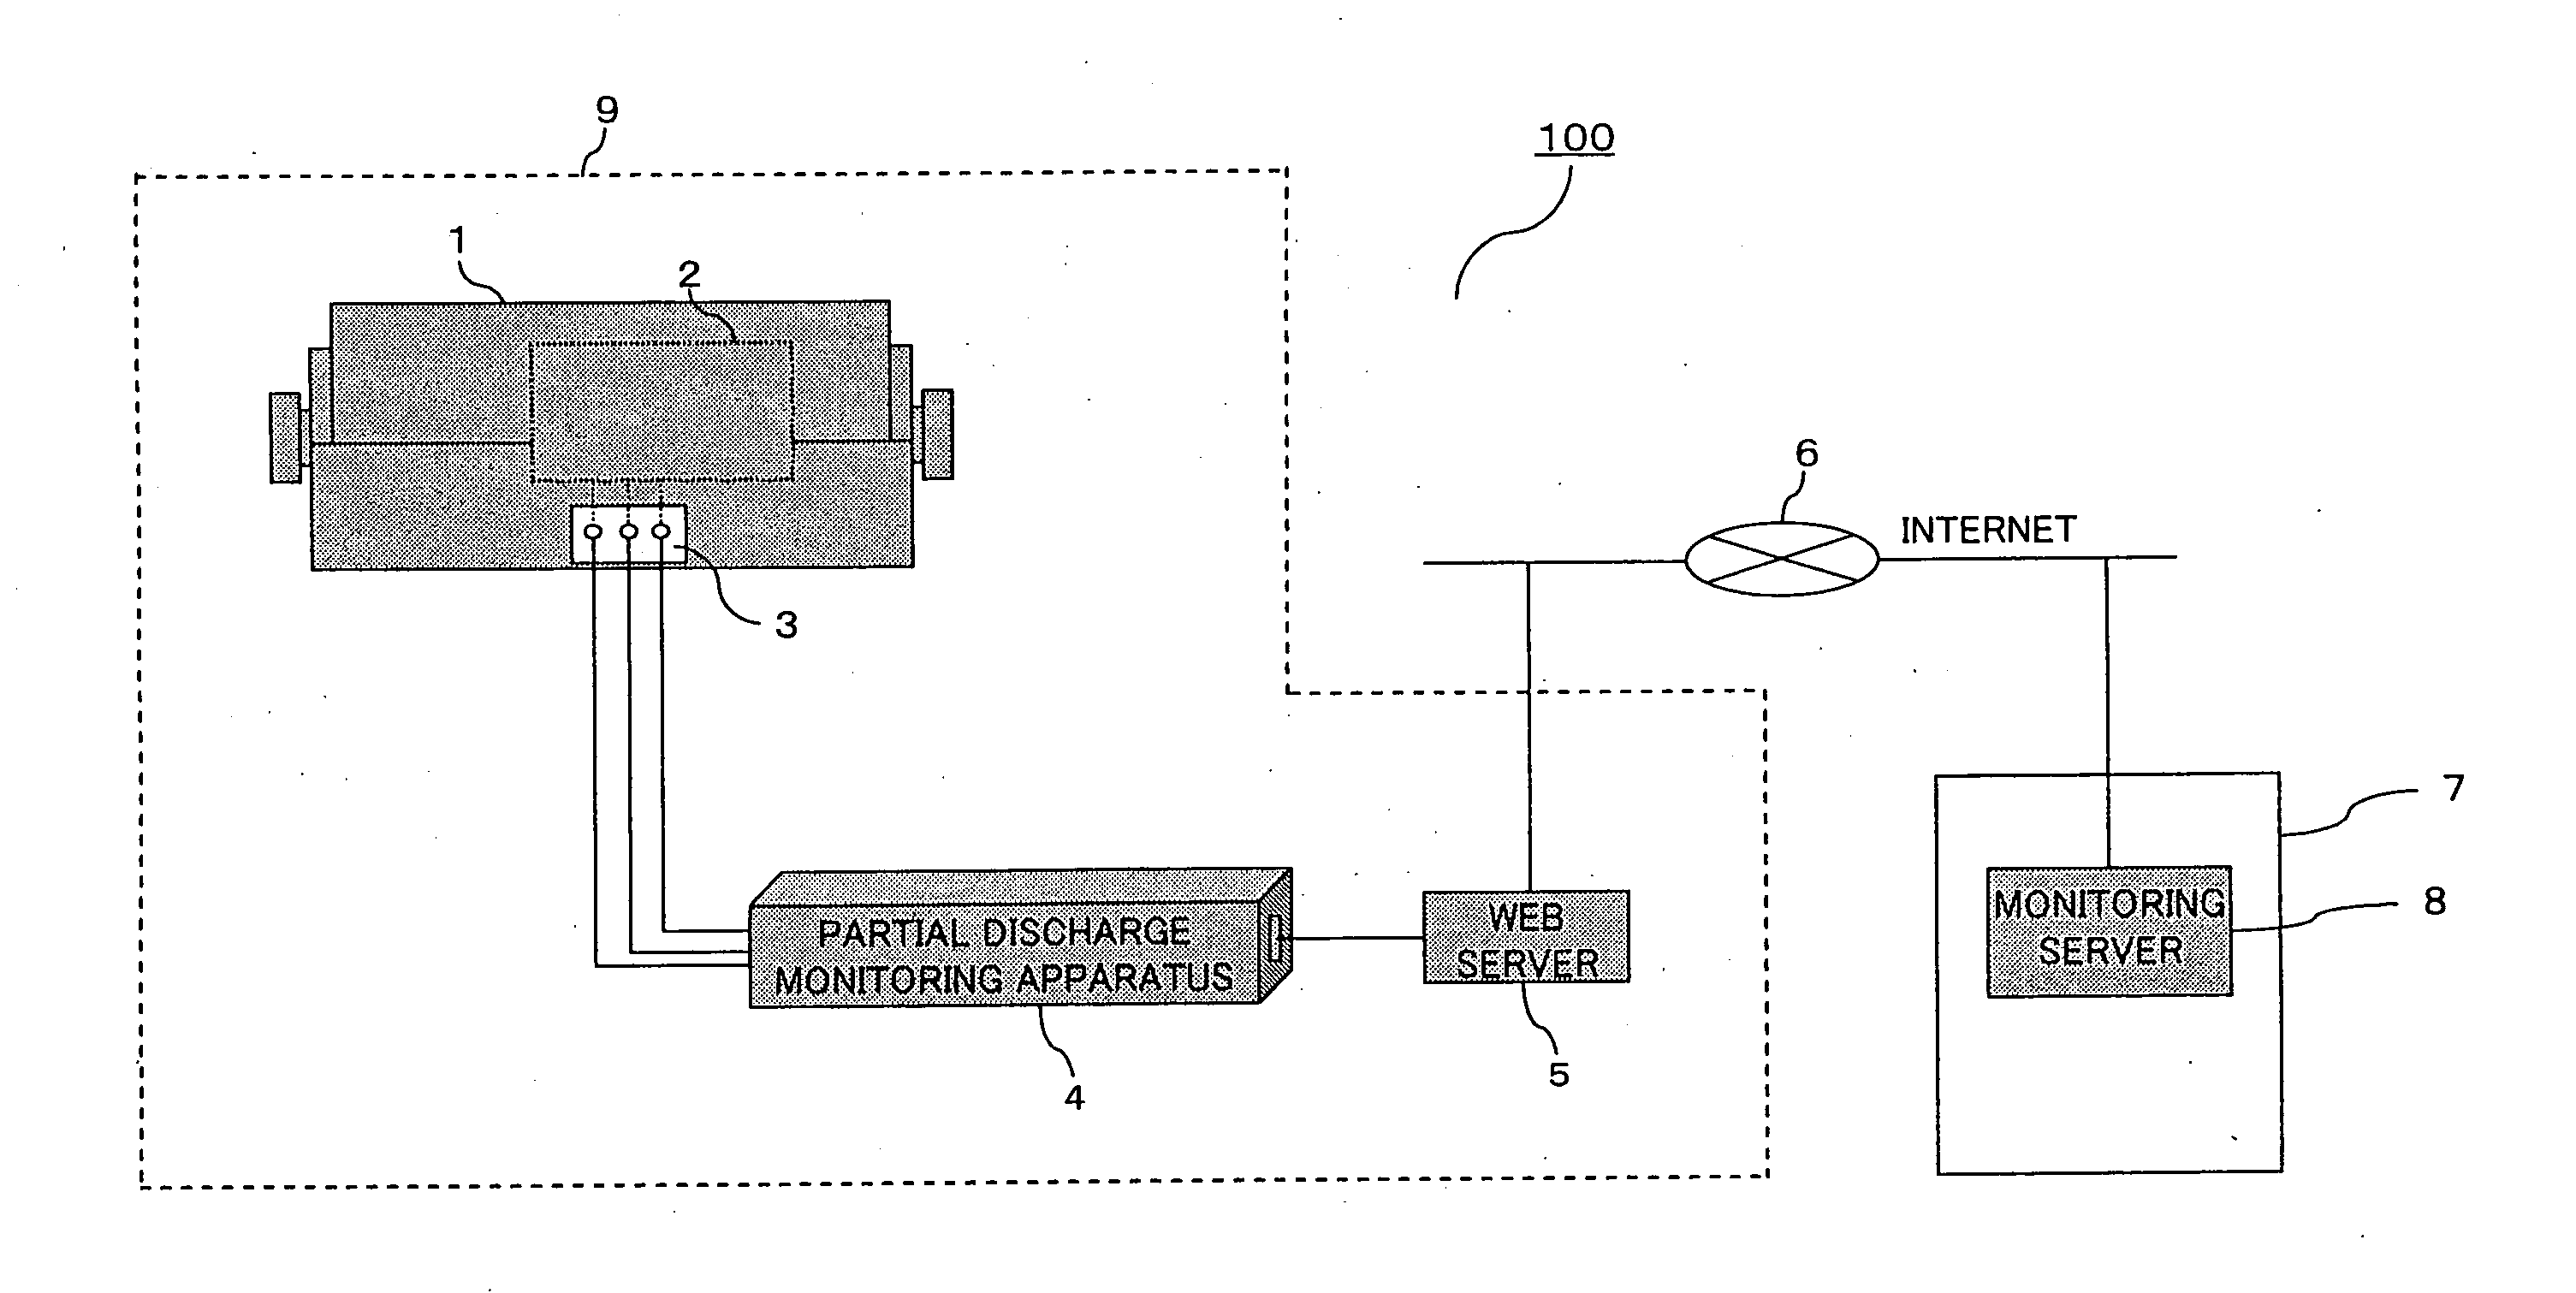 Partial discharge monitoring apparatus and partial discharge remote monitoring system for rotating electric machines